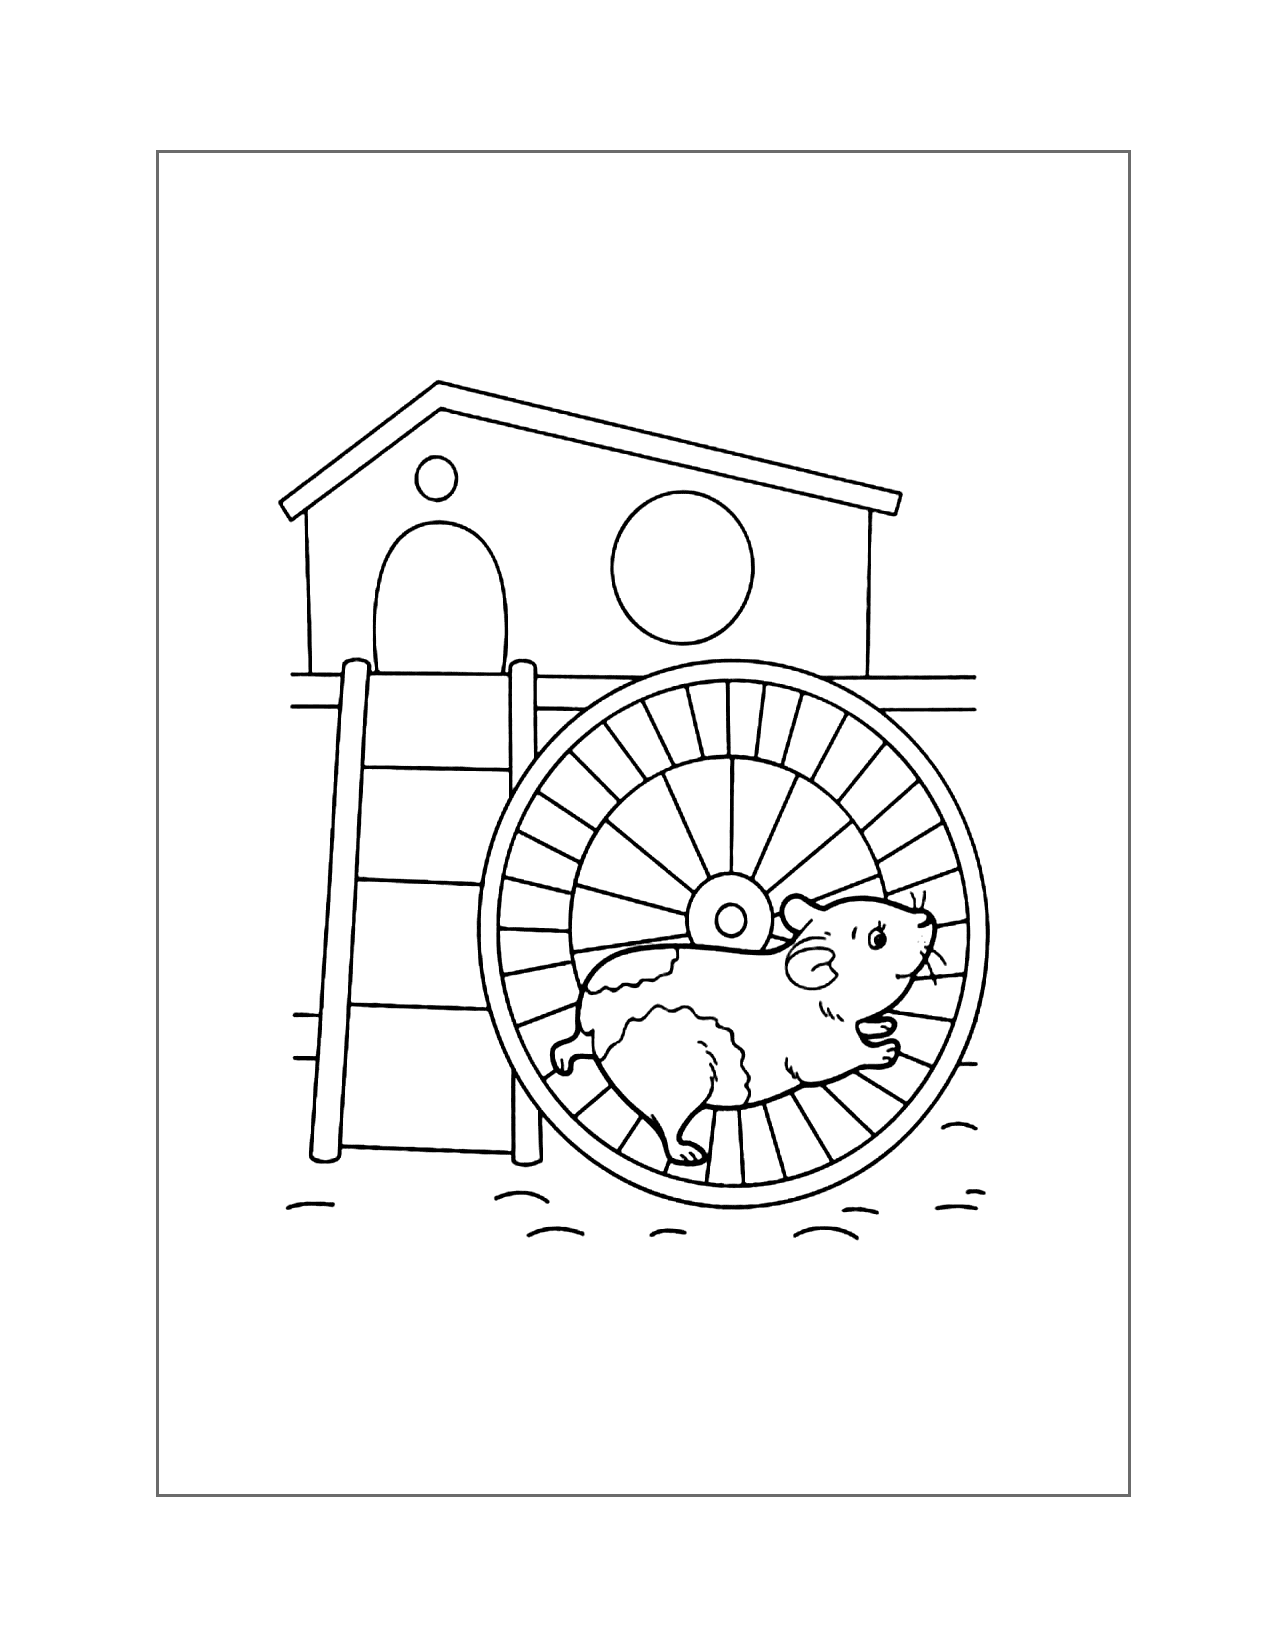 Hamster On Wheel Coloring Page